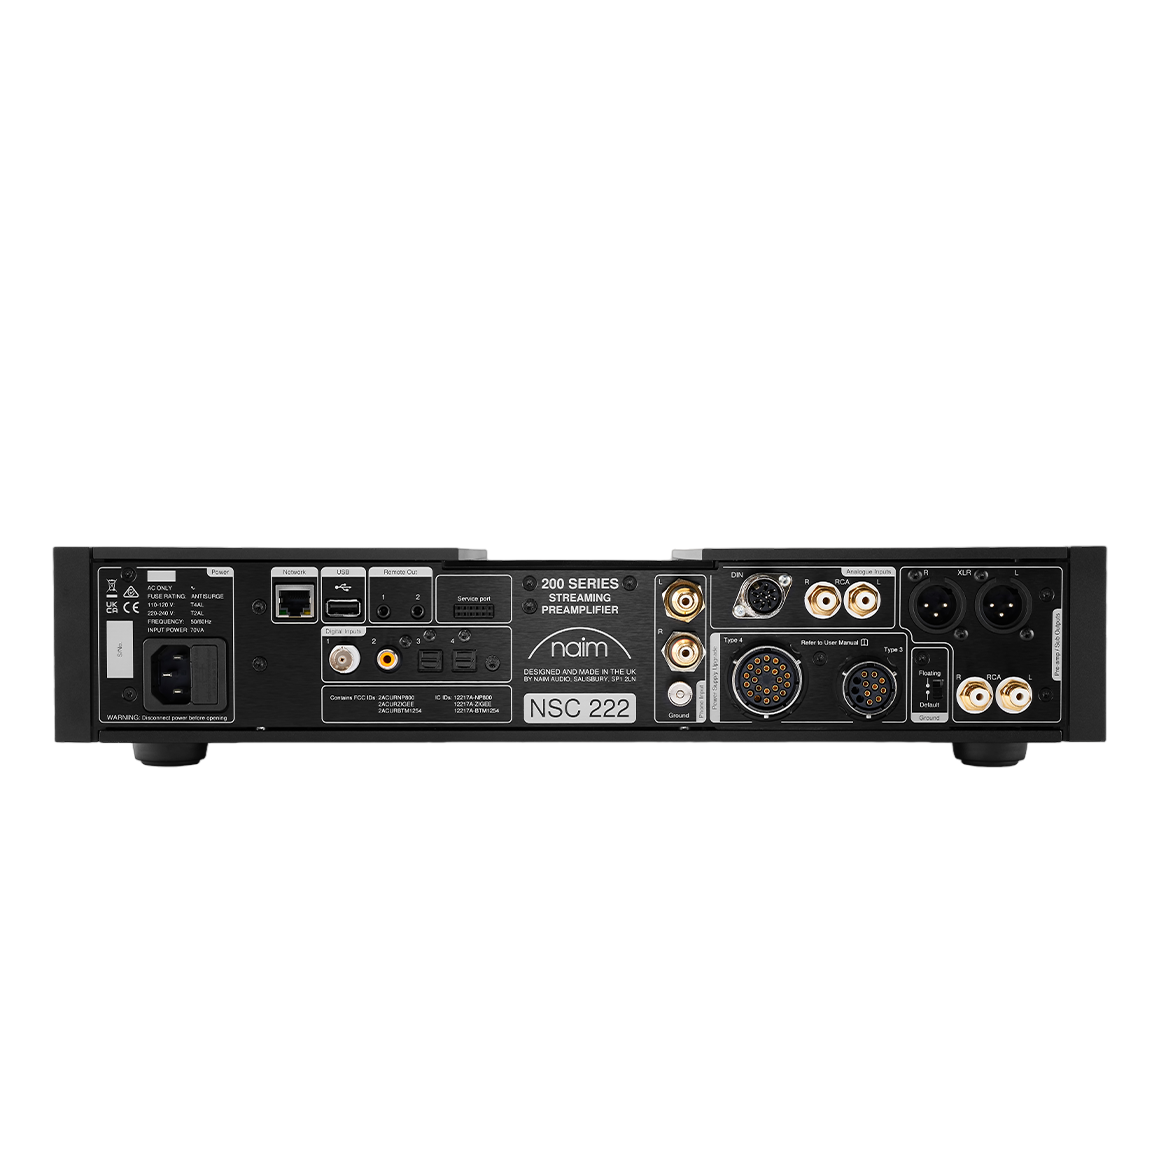 NSC 222 | Preamplifier | Network Audio Player